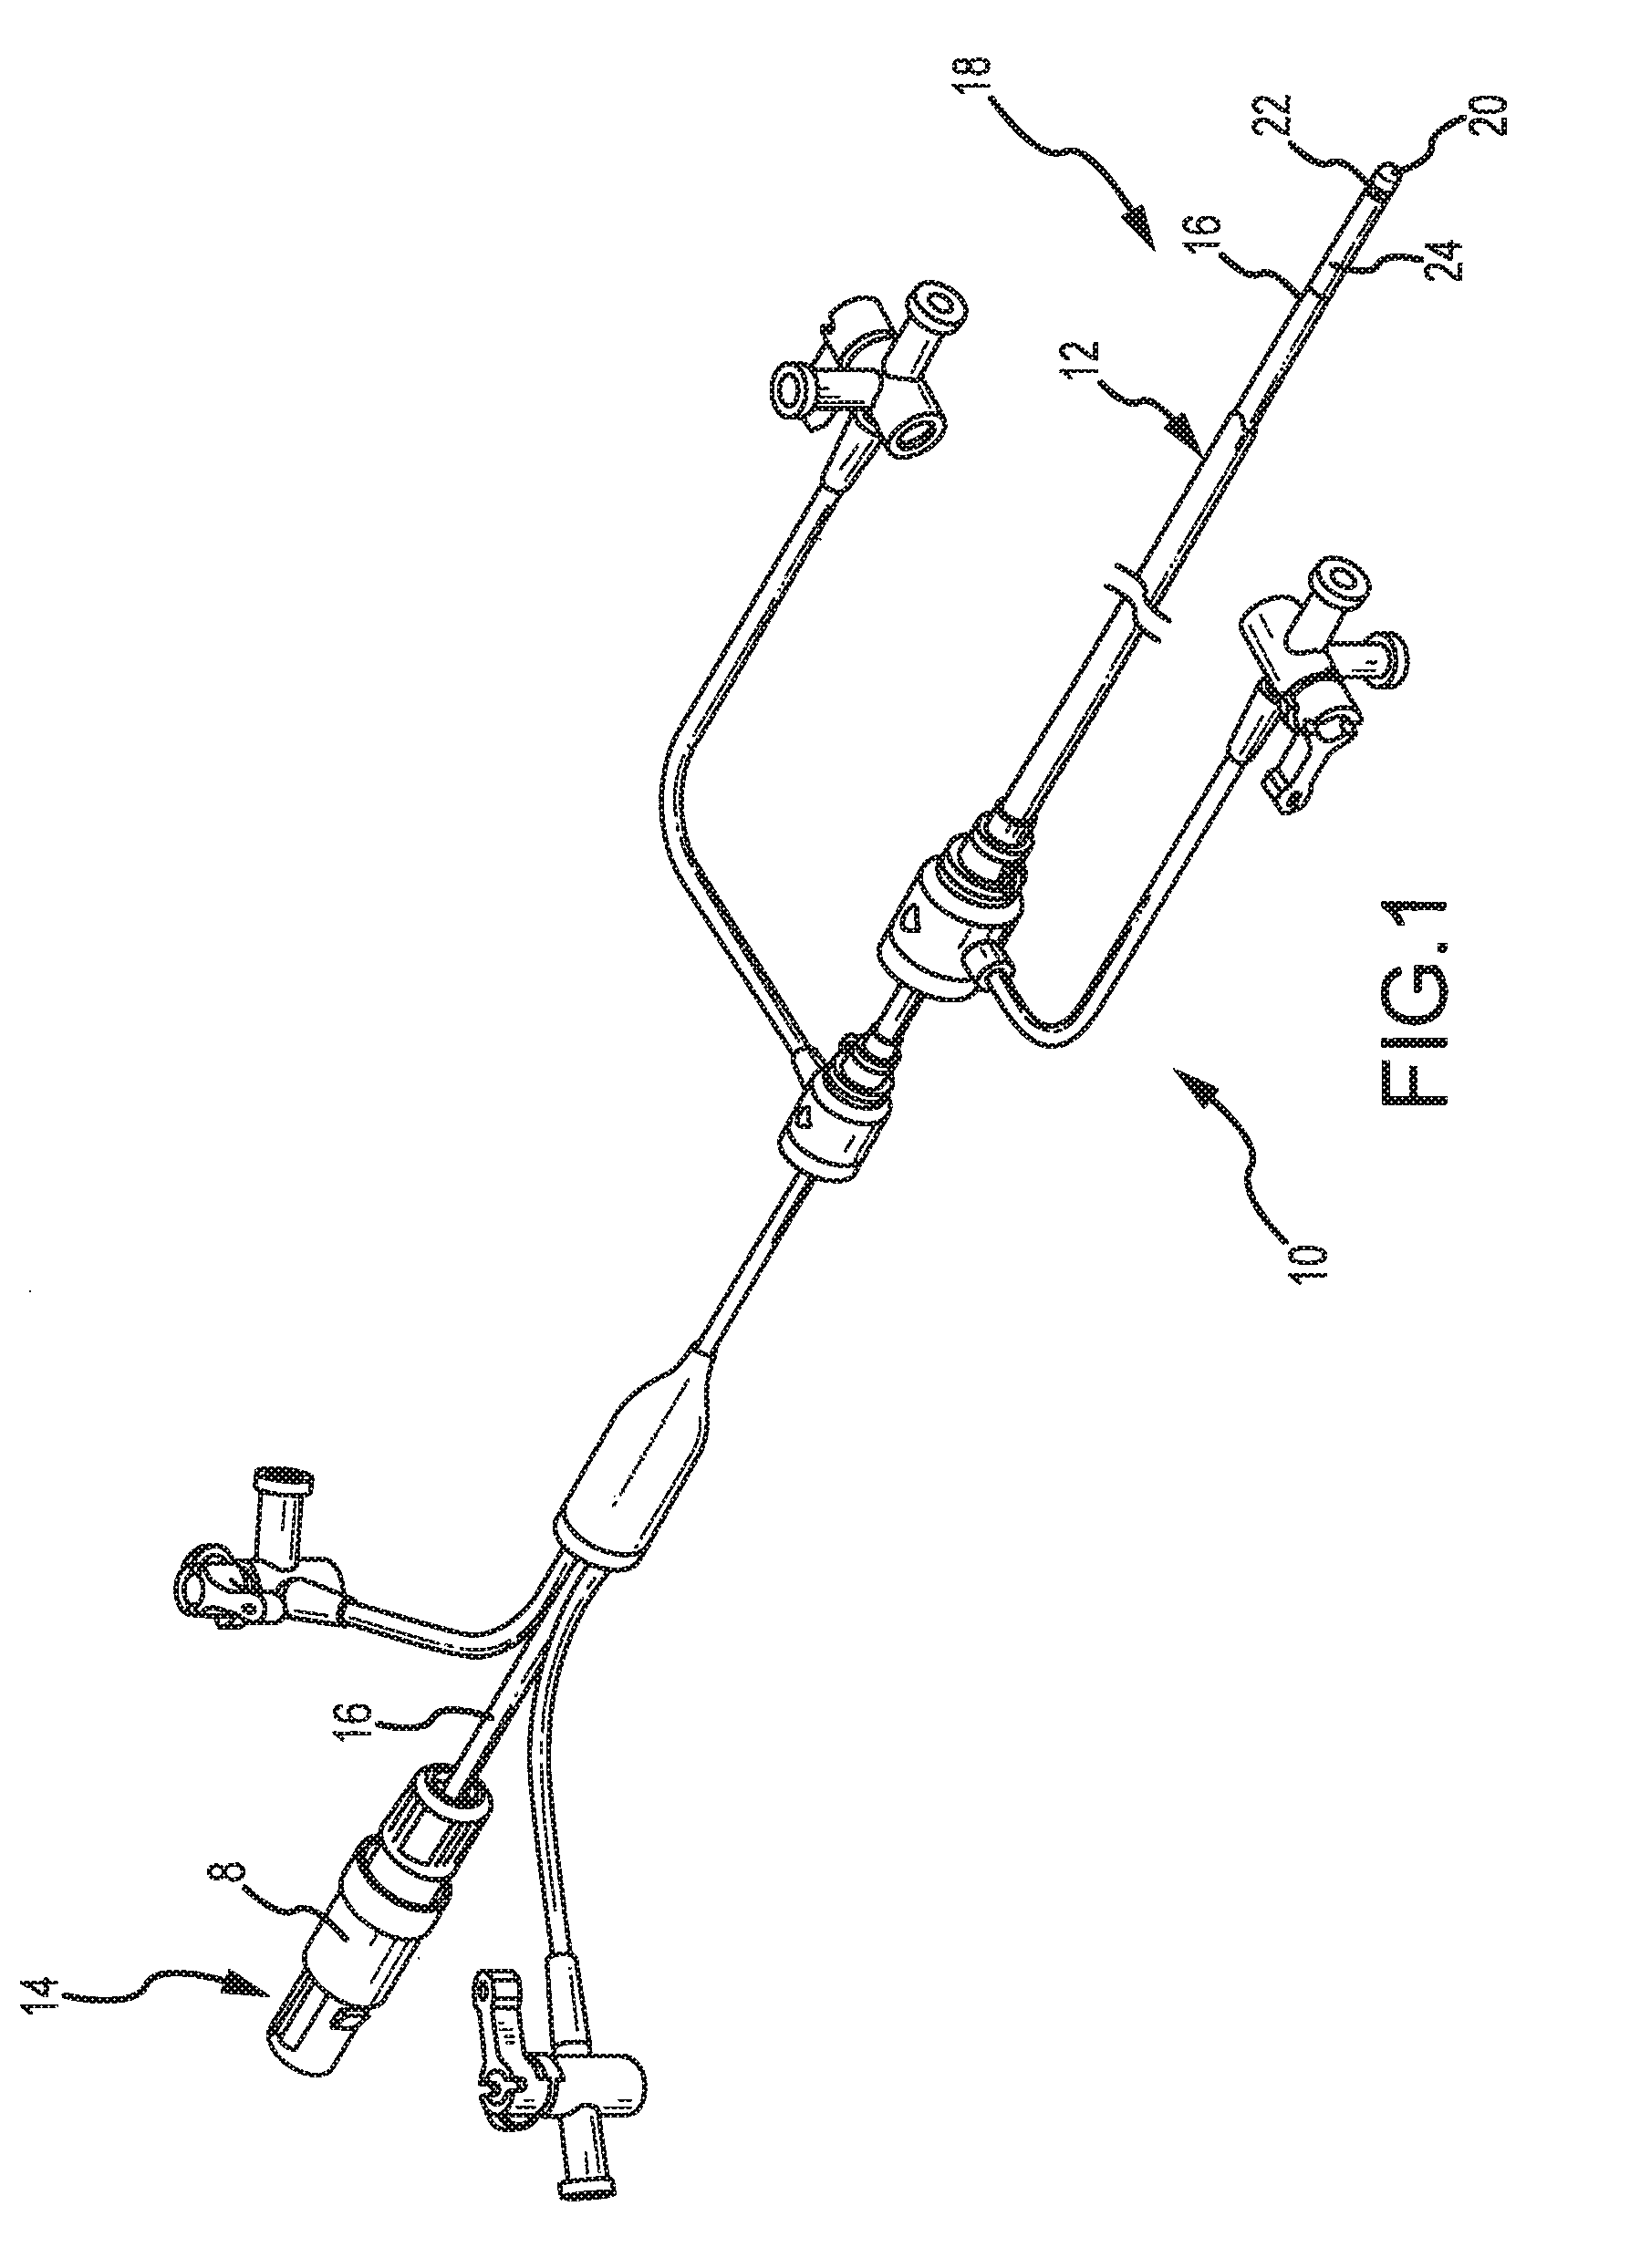 Deflectable catheter with distal deflectable segment